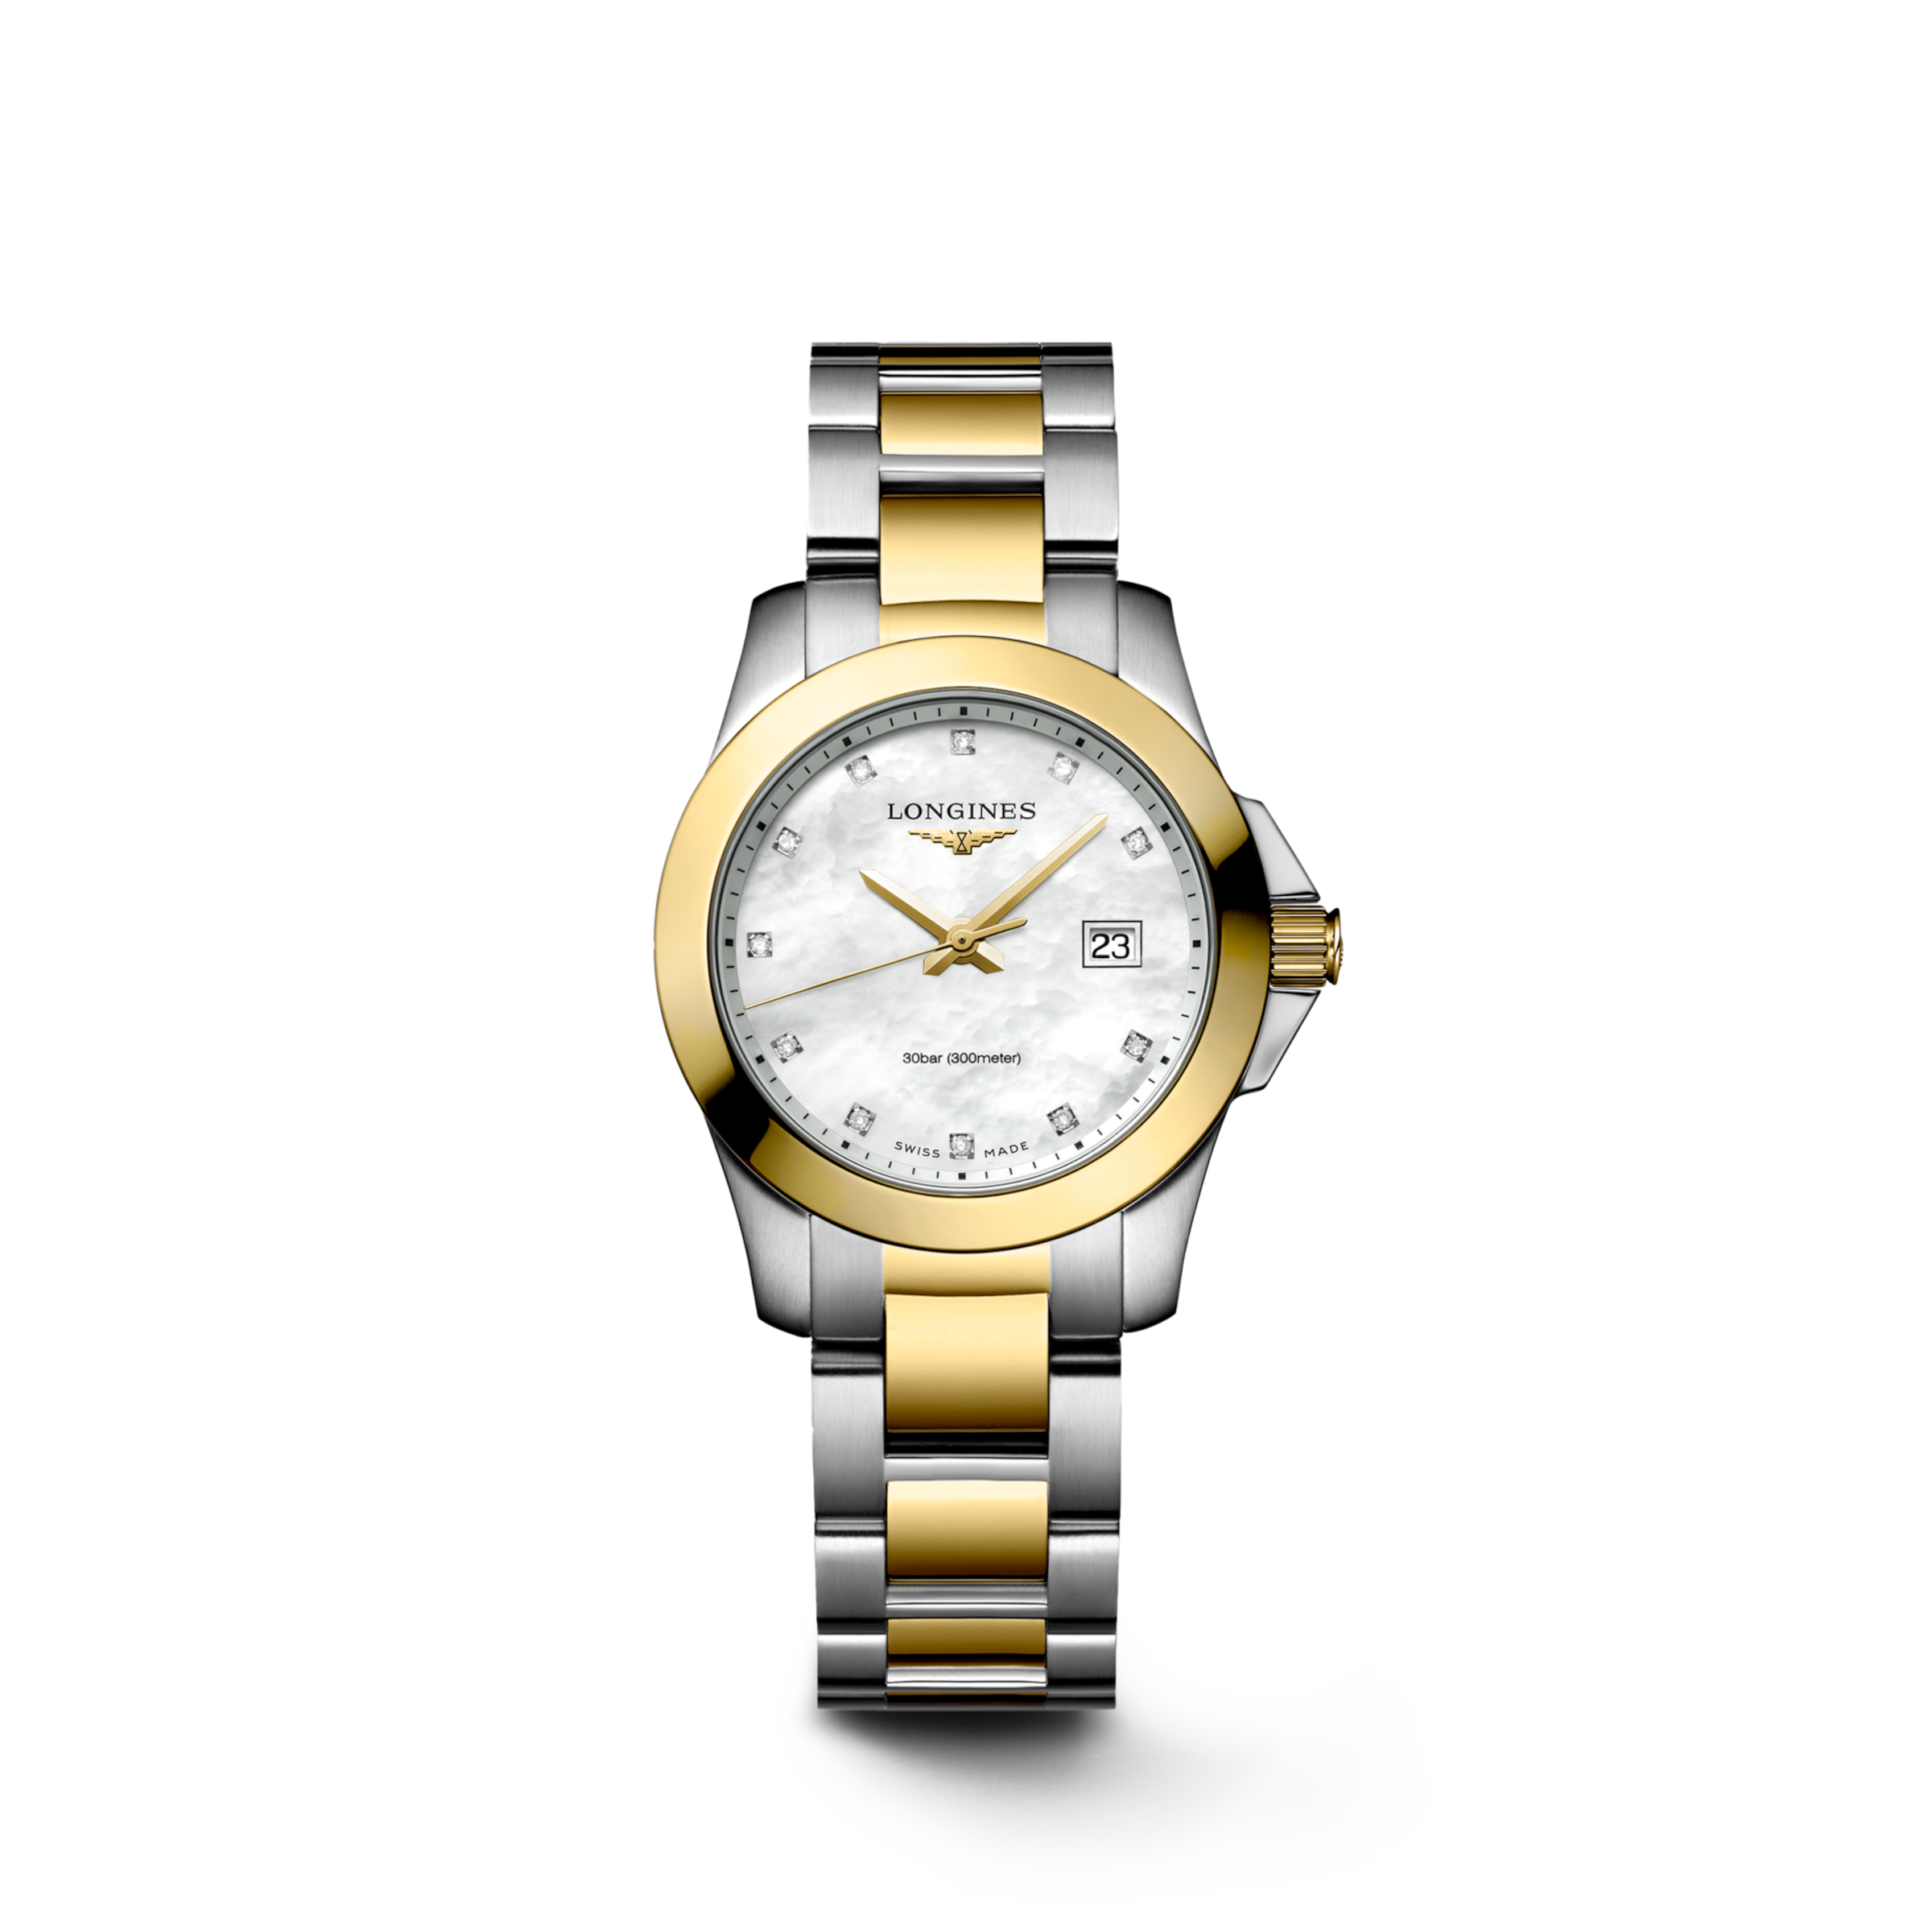 Longines CONQUEST Quartz Stainless steel and yellow PVD coating Watch - L3.376.3.87.7